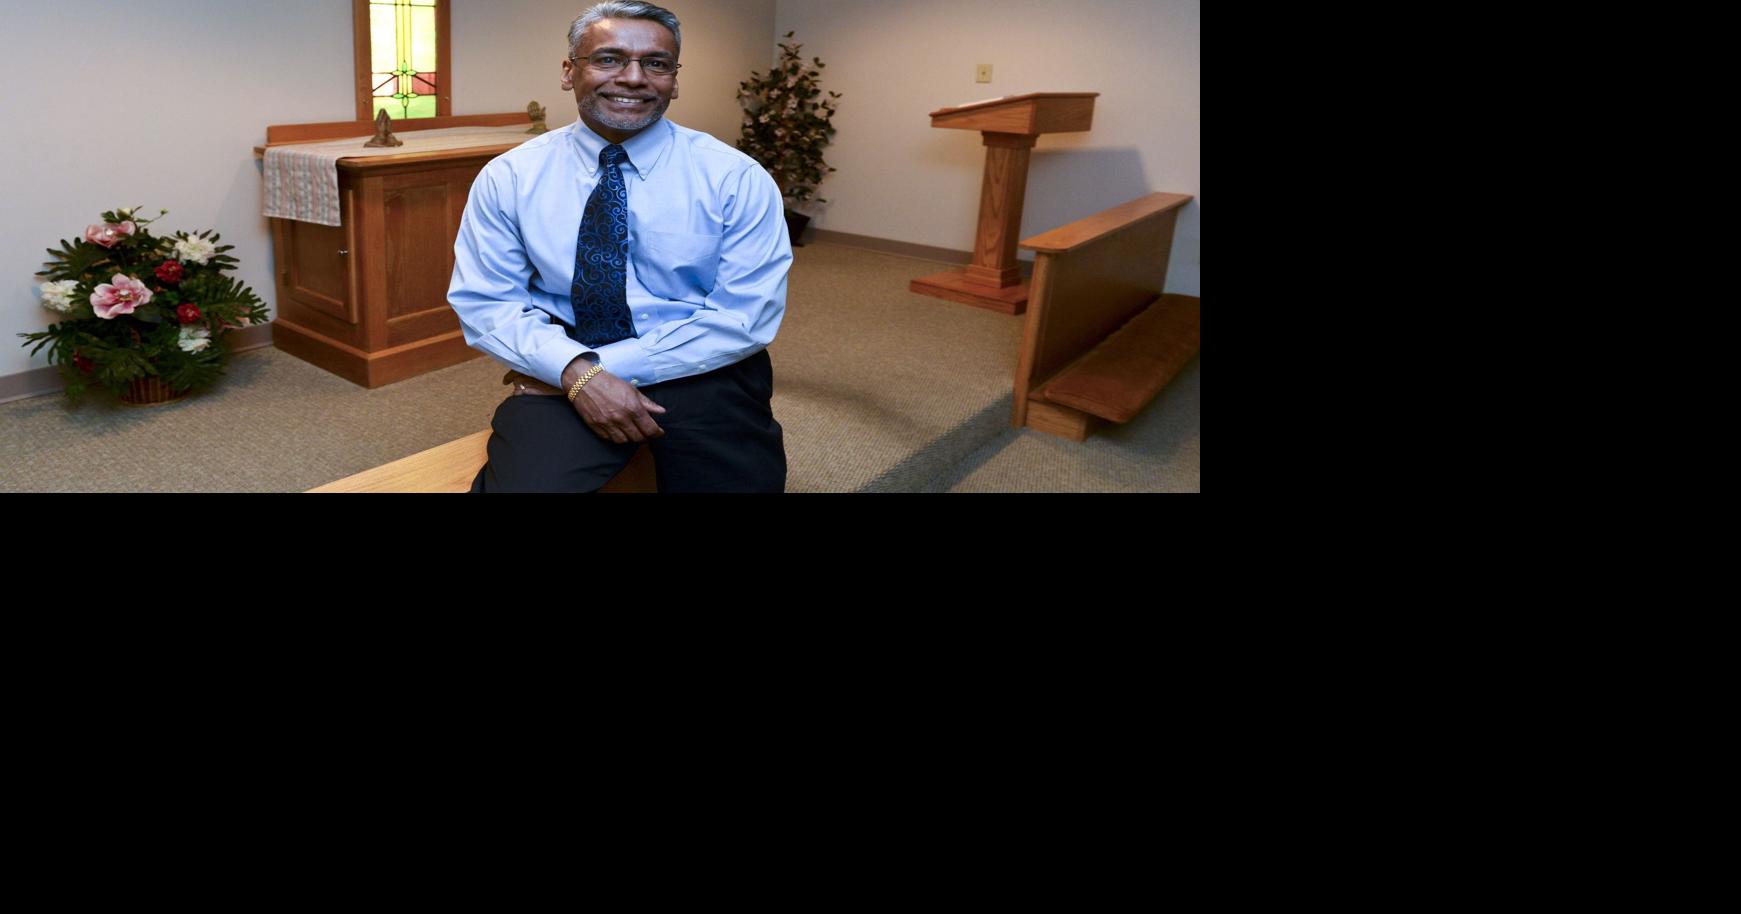 Florida pastor blends faith with athletics - The Baptist Paper